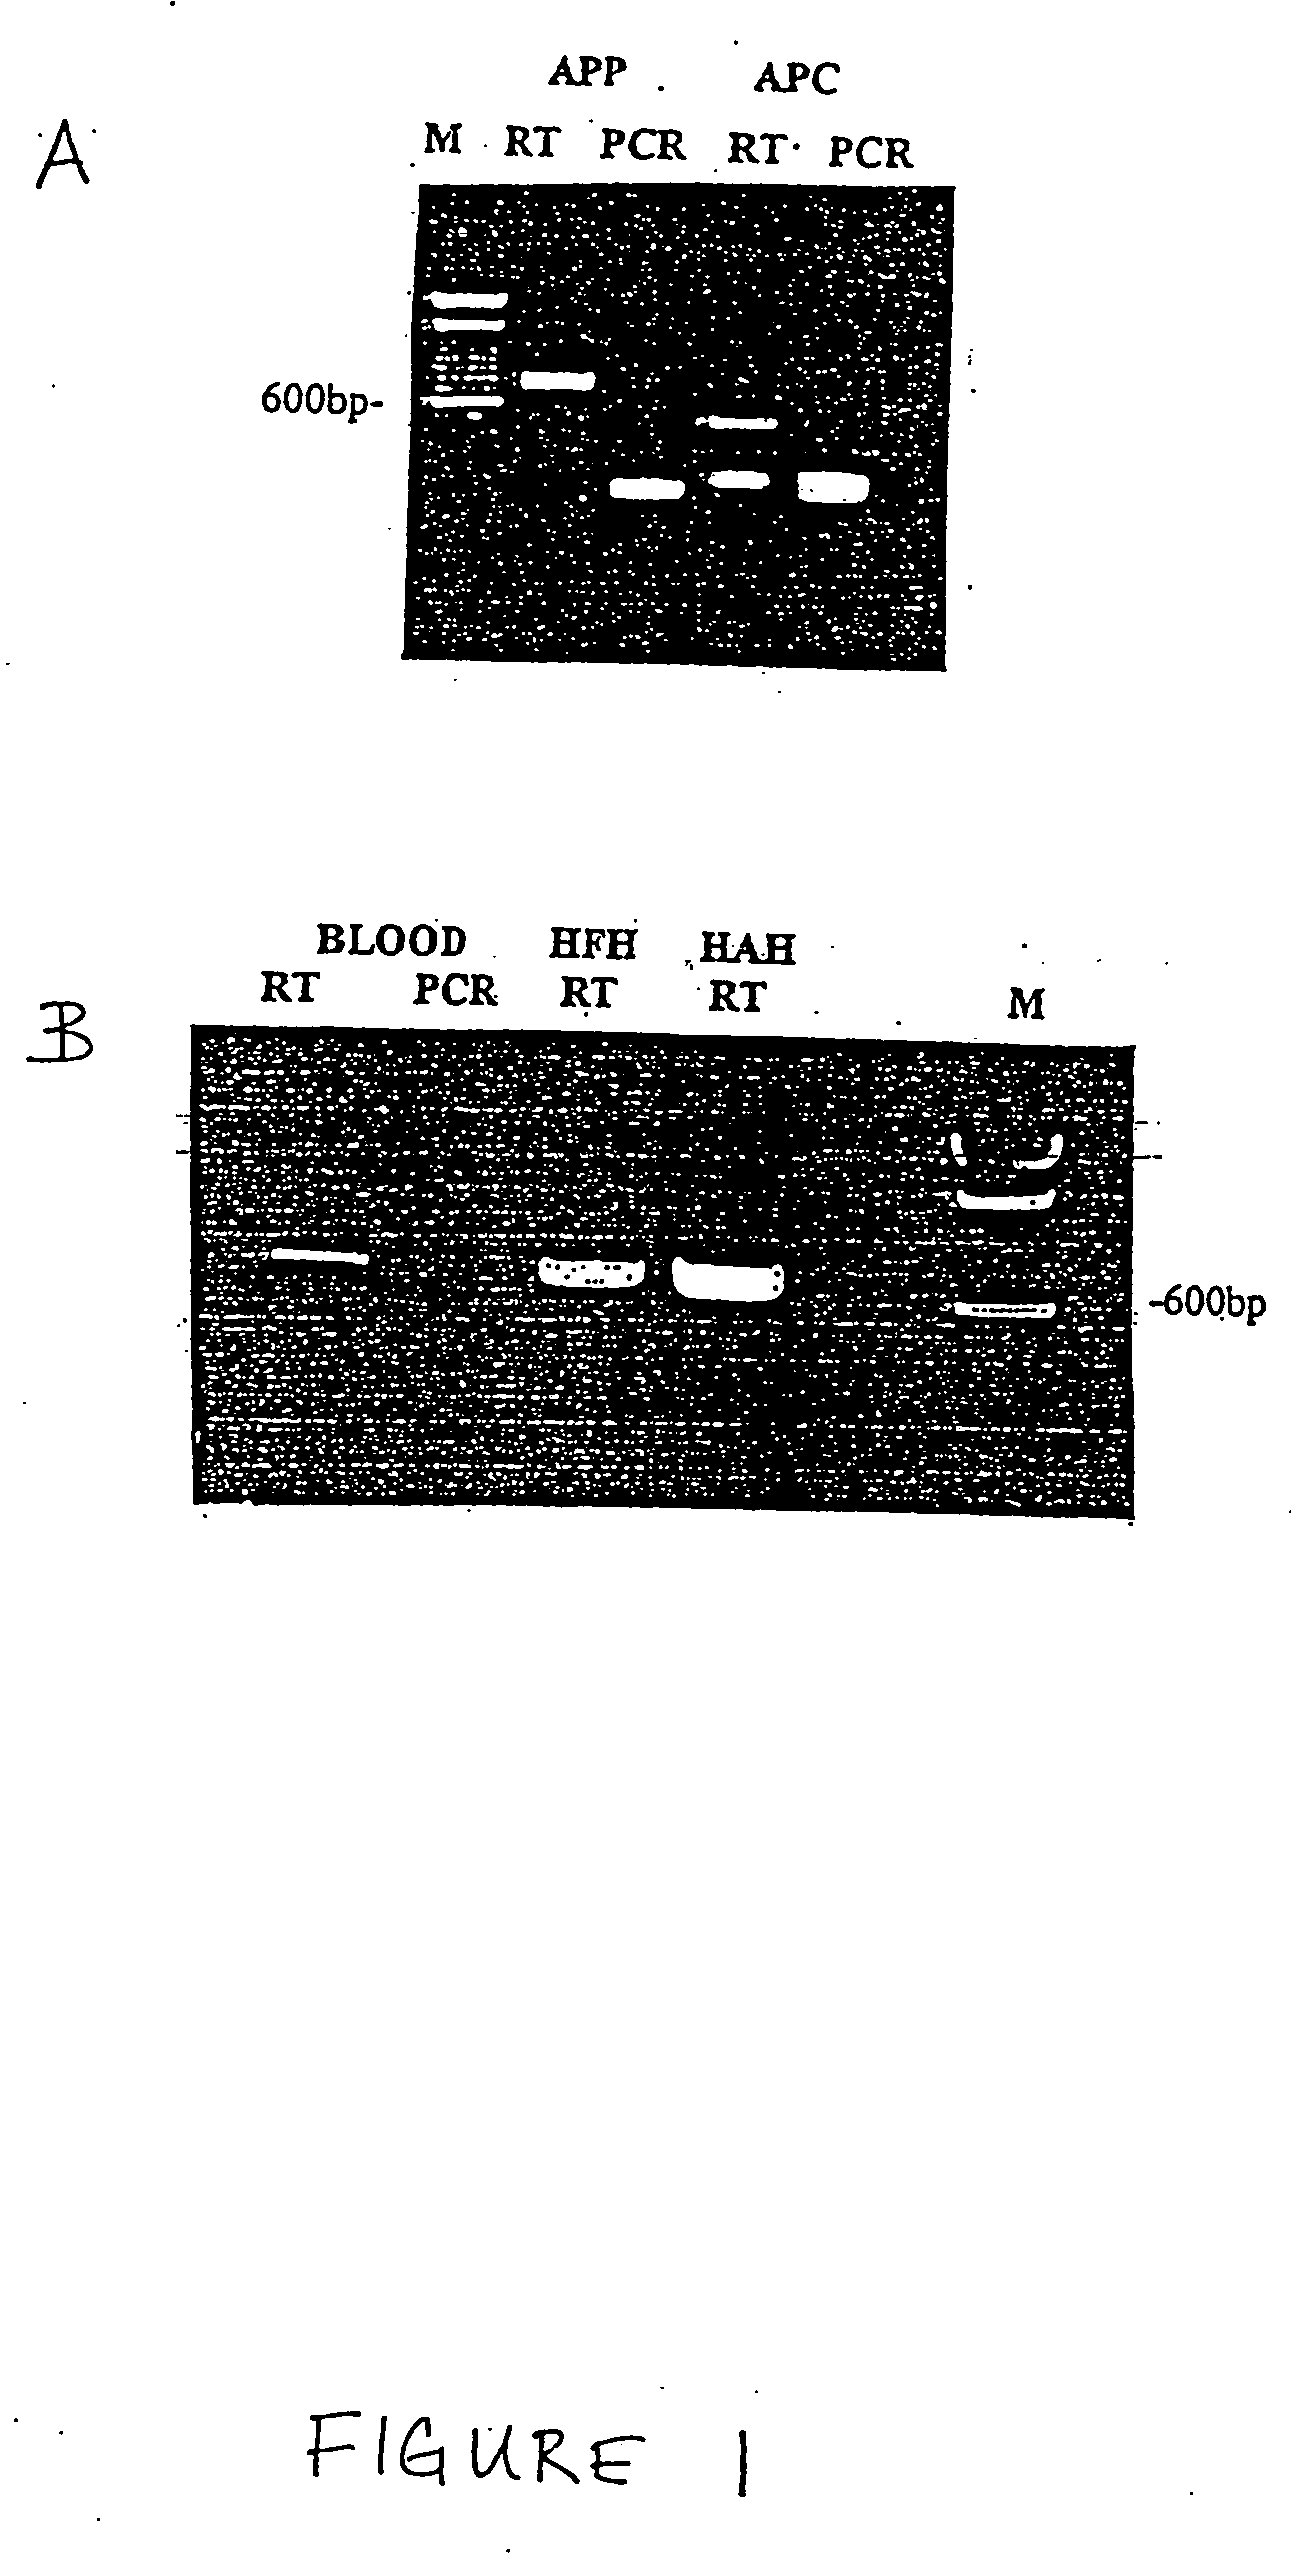 Method for the detection of schizophrenia related gene transcripts in blood